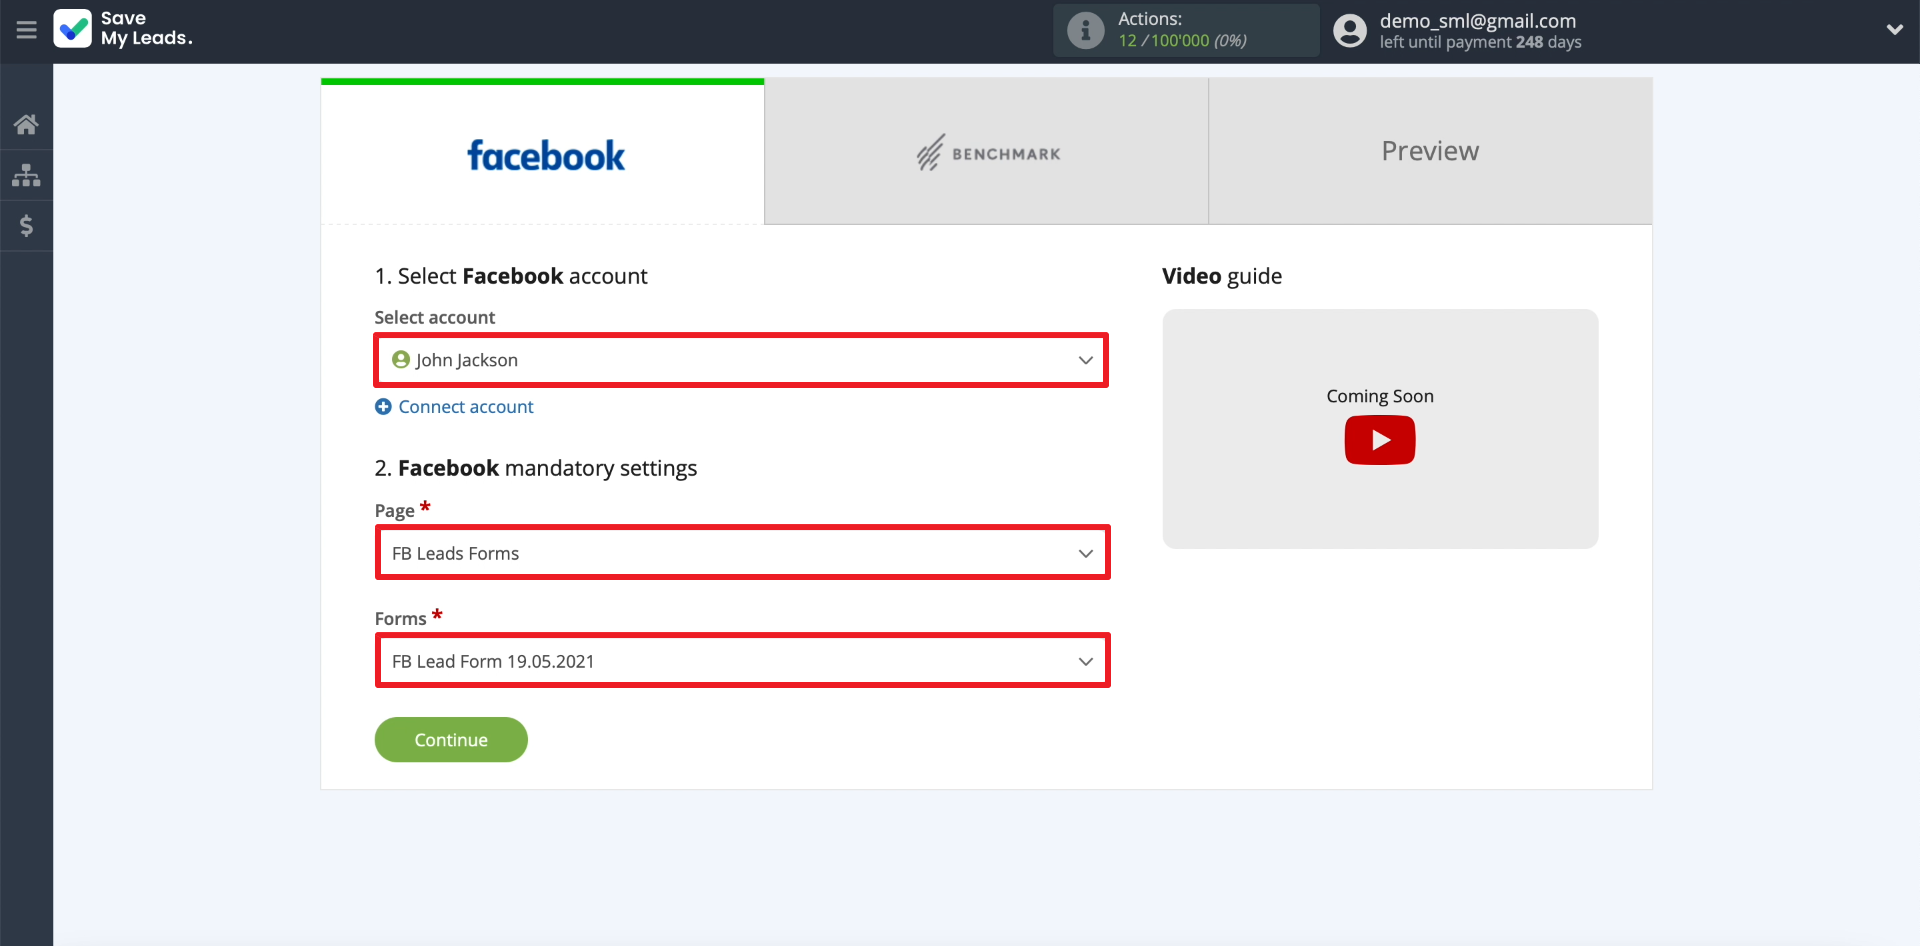 Facebook and Benchmark integration |&nbsp;Setting up leads upload